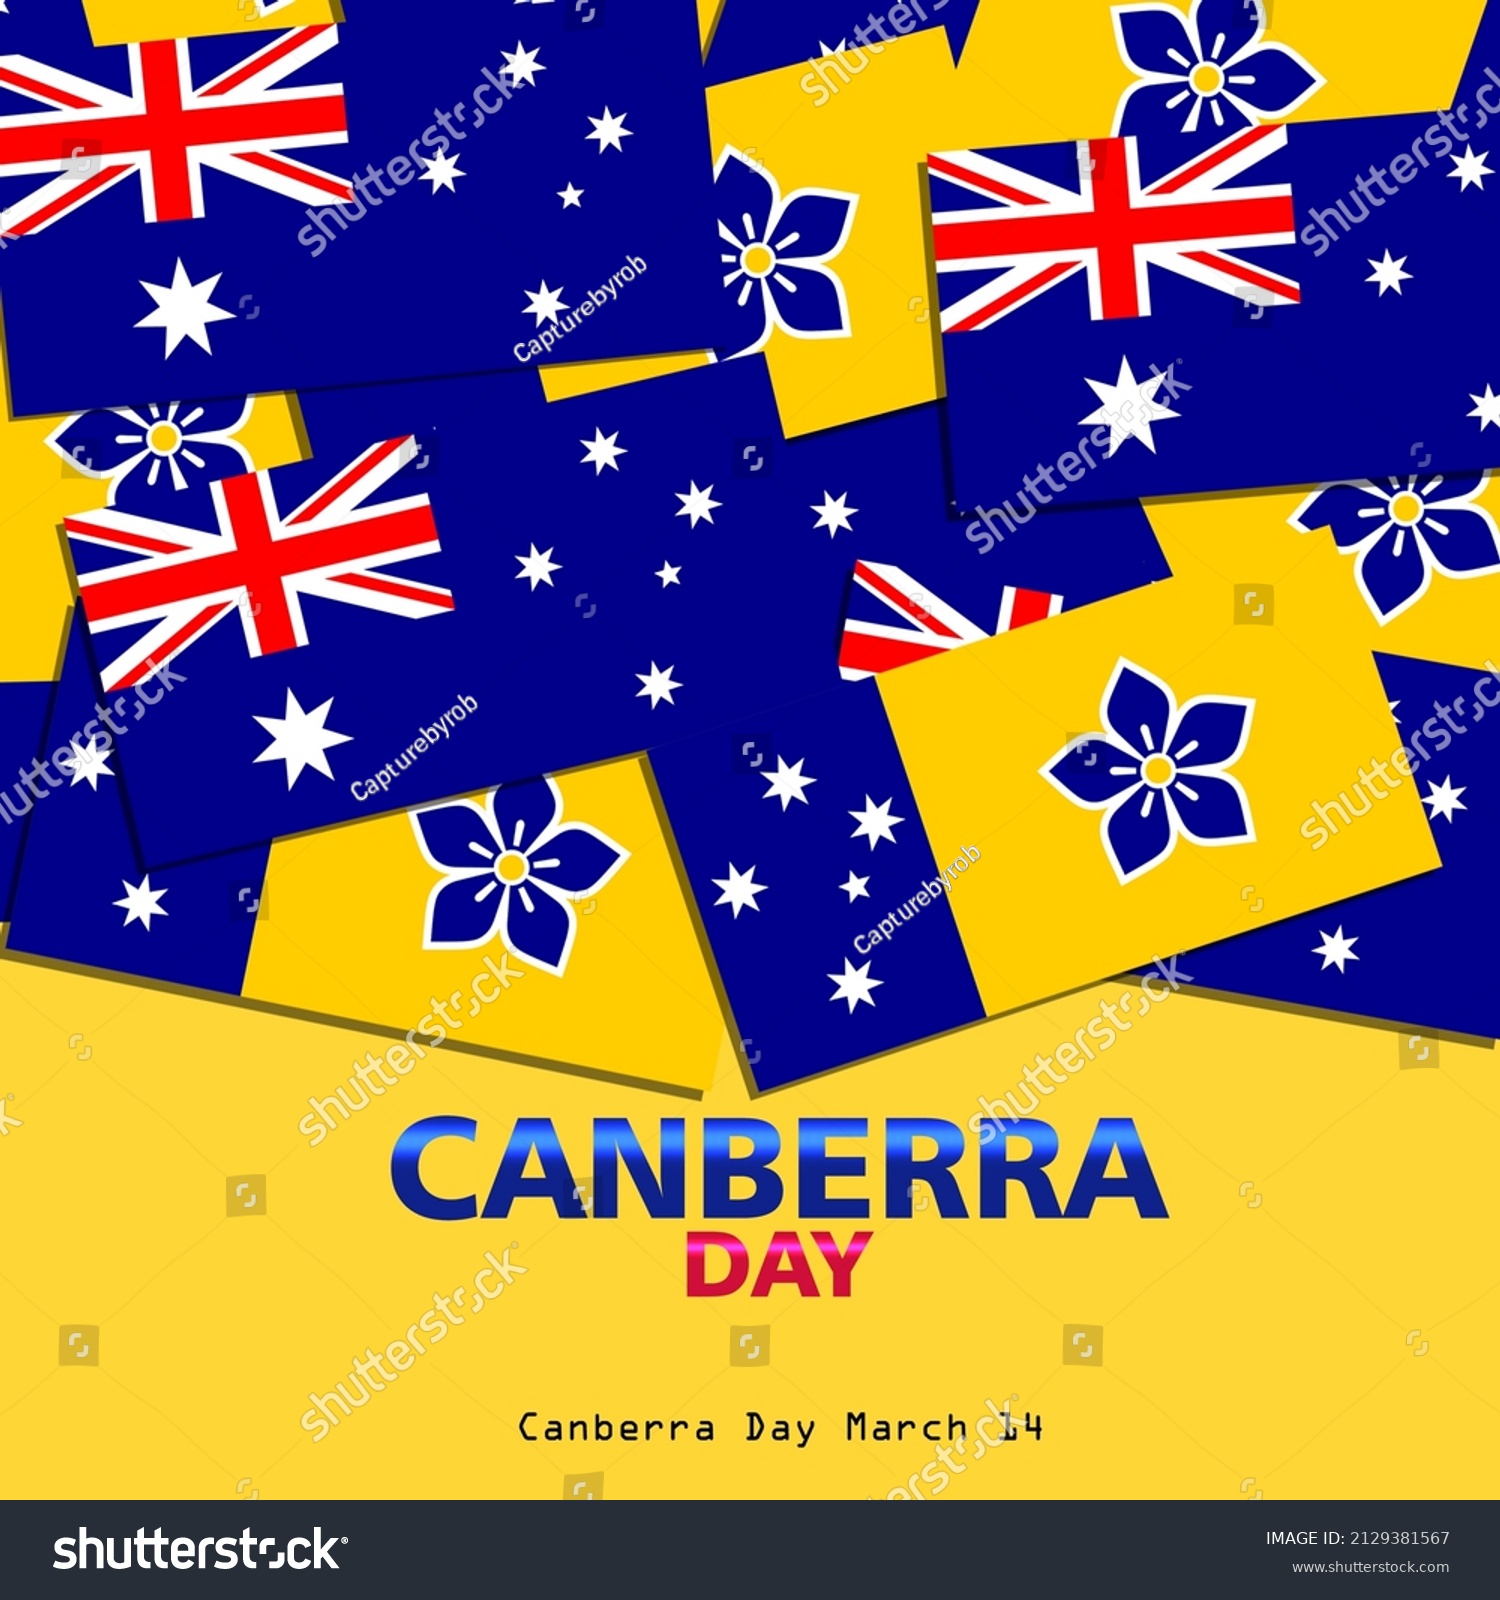 SVG of stack of canberra flags and australian flags and words on yellow background, Canberra Day March 14 svg